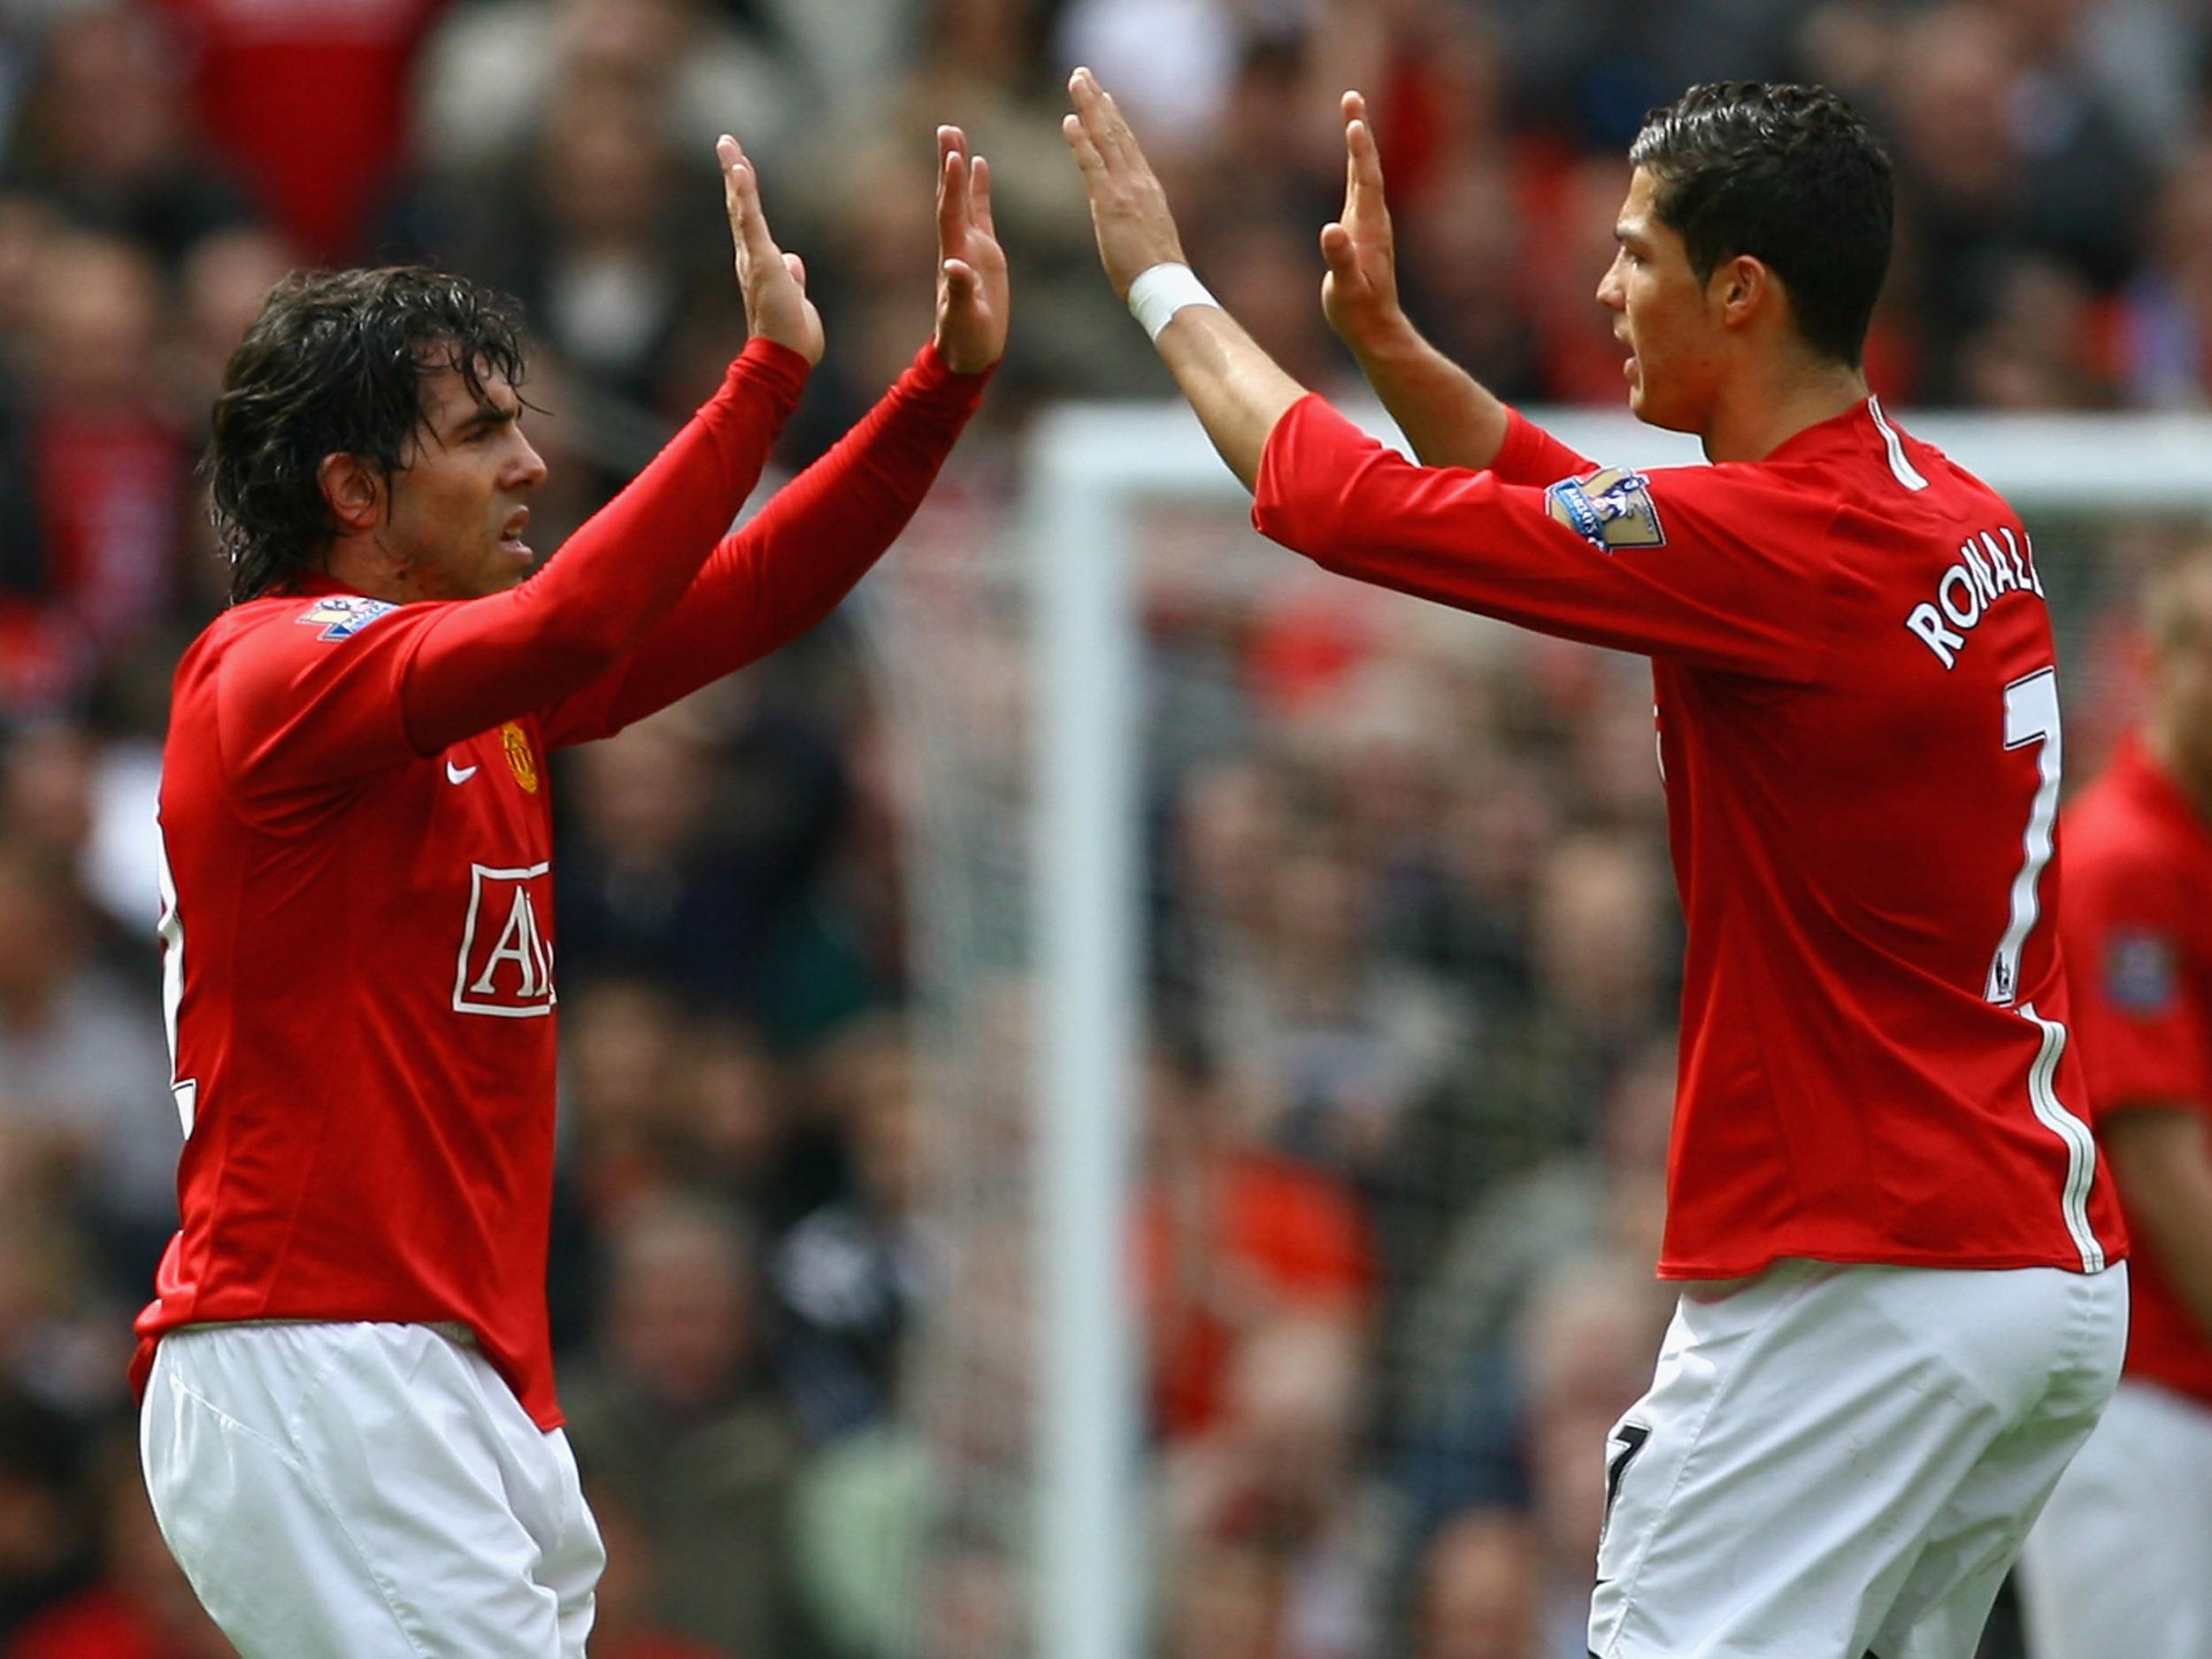 Ronaldo and Tevez were instrumental in United 2008 Champions League win